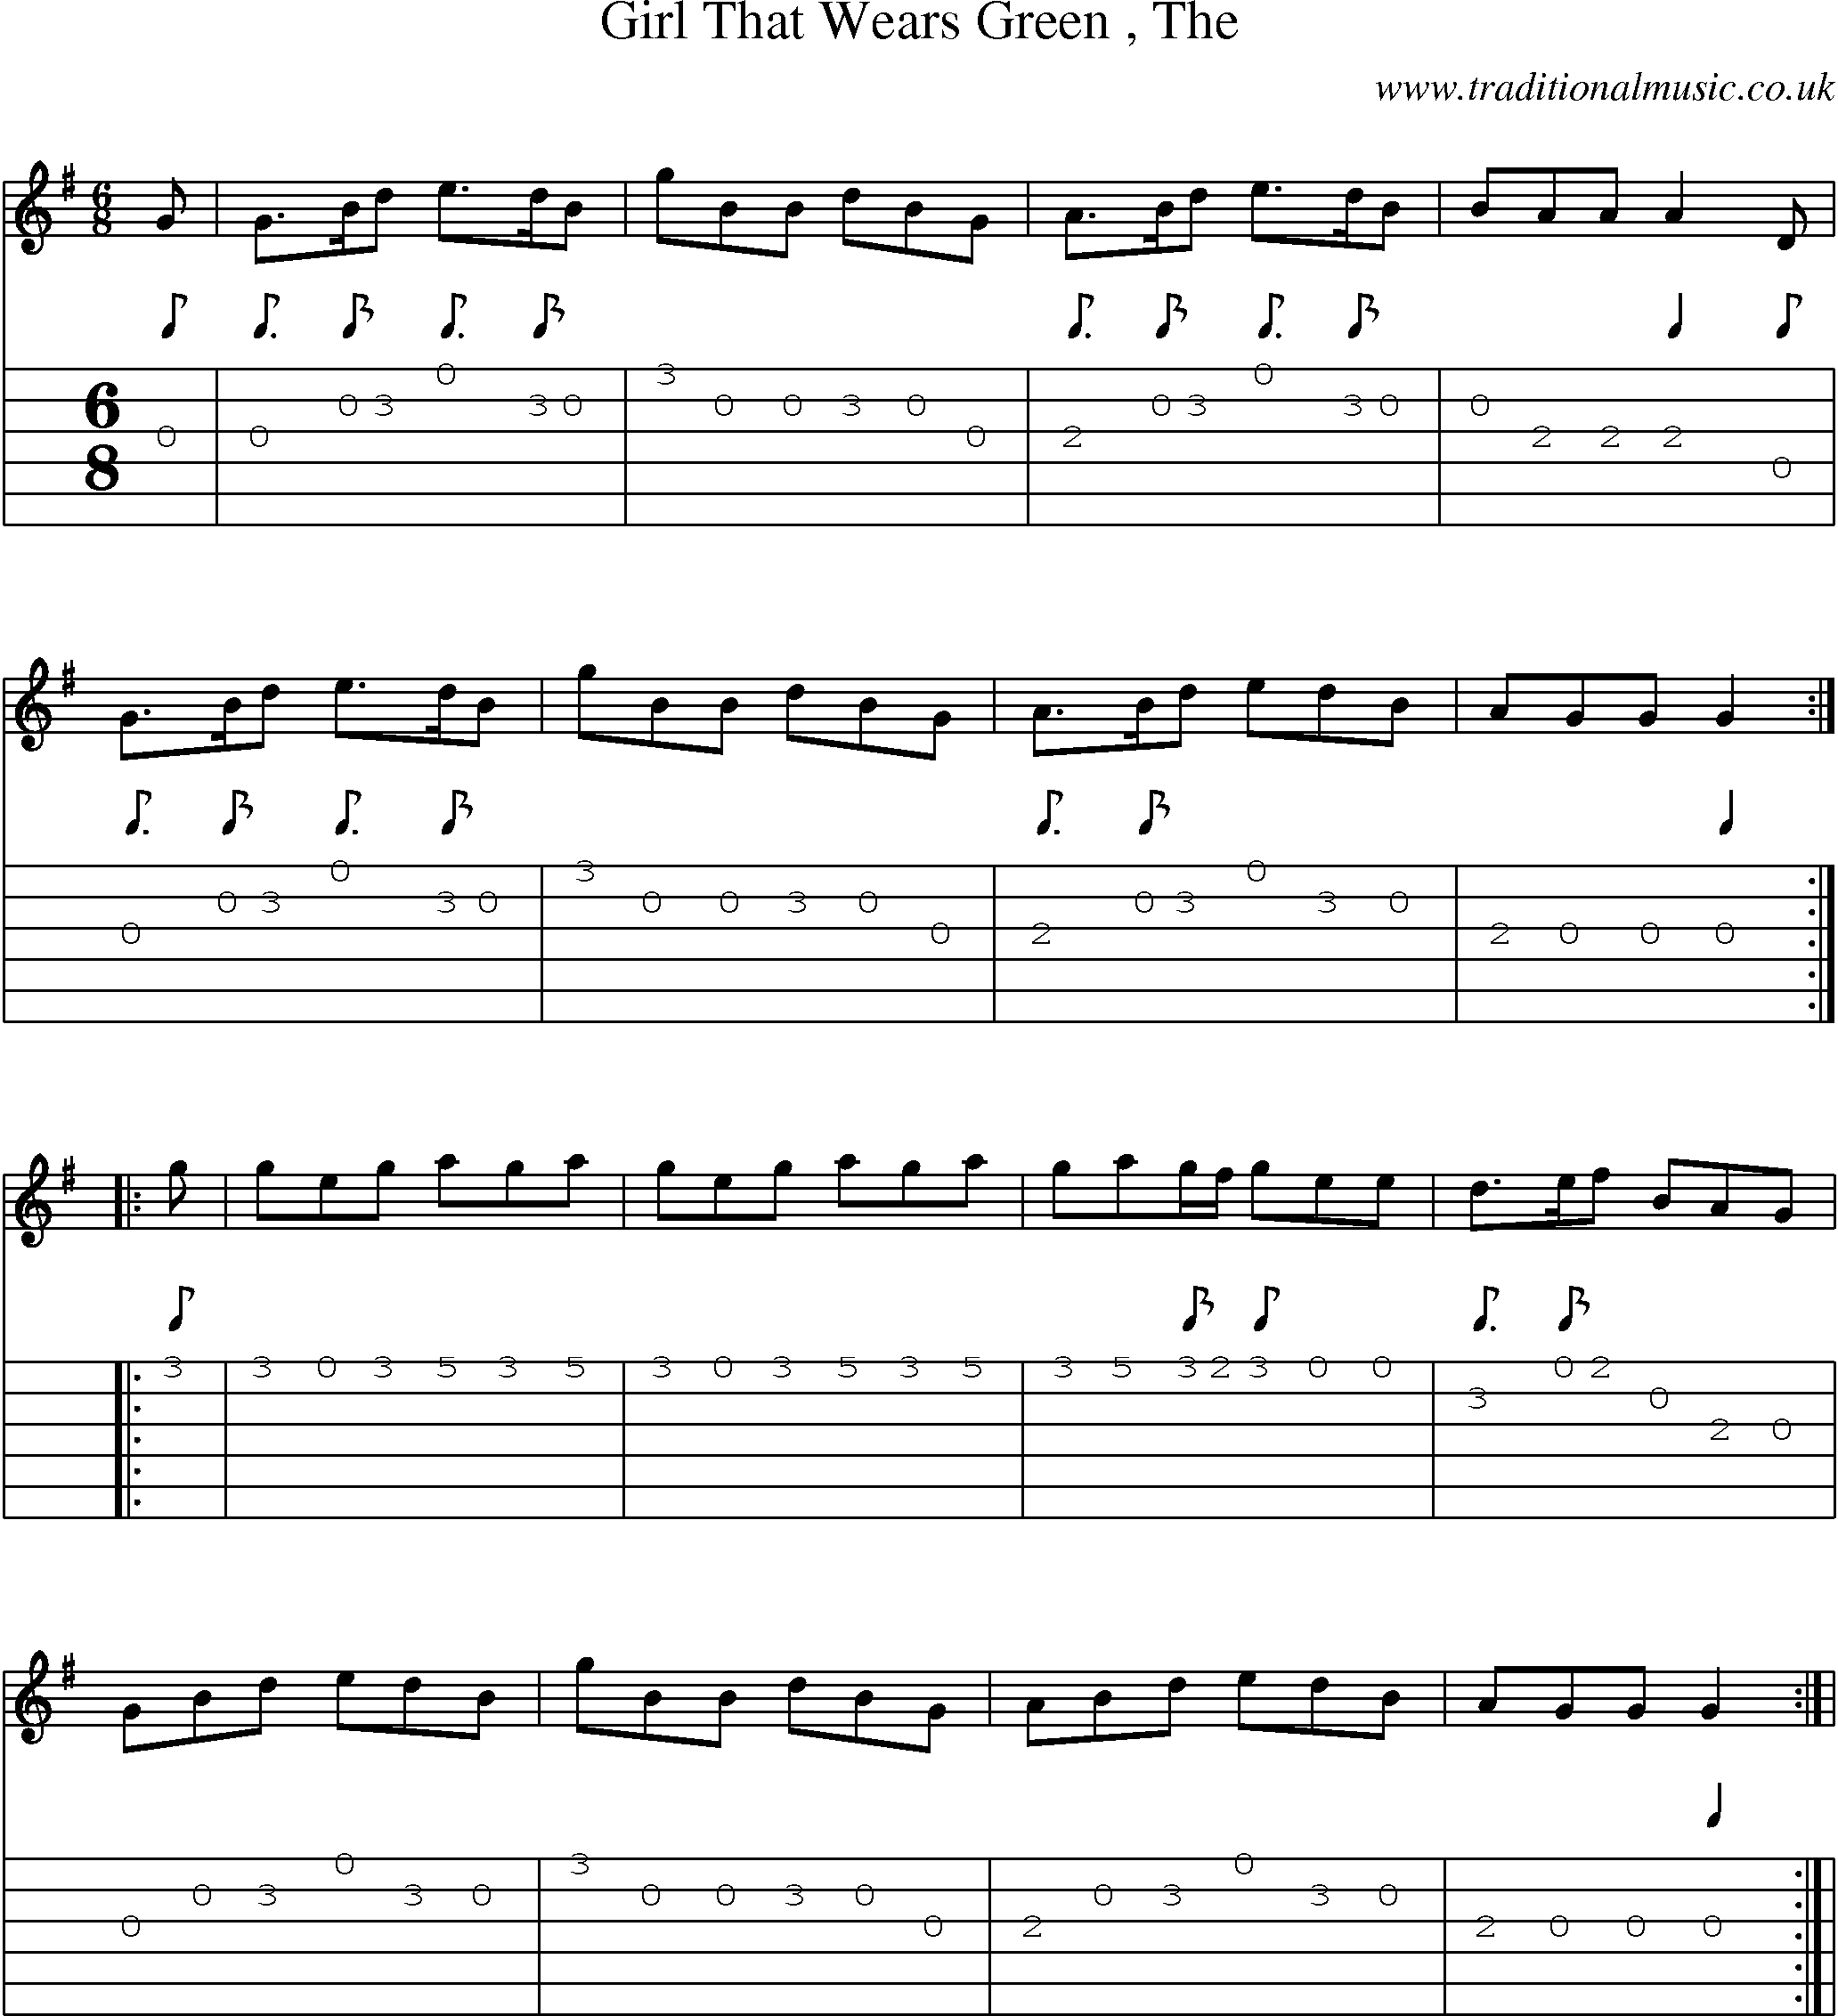 Music Score and Guitar Tabs for Girl That Wears Green